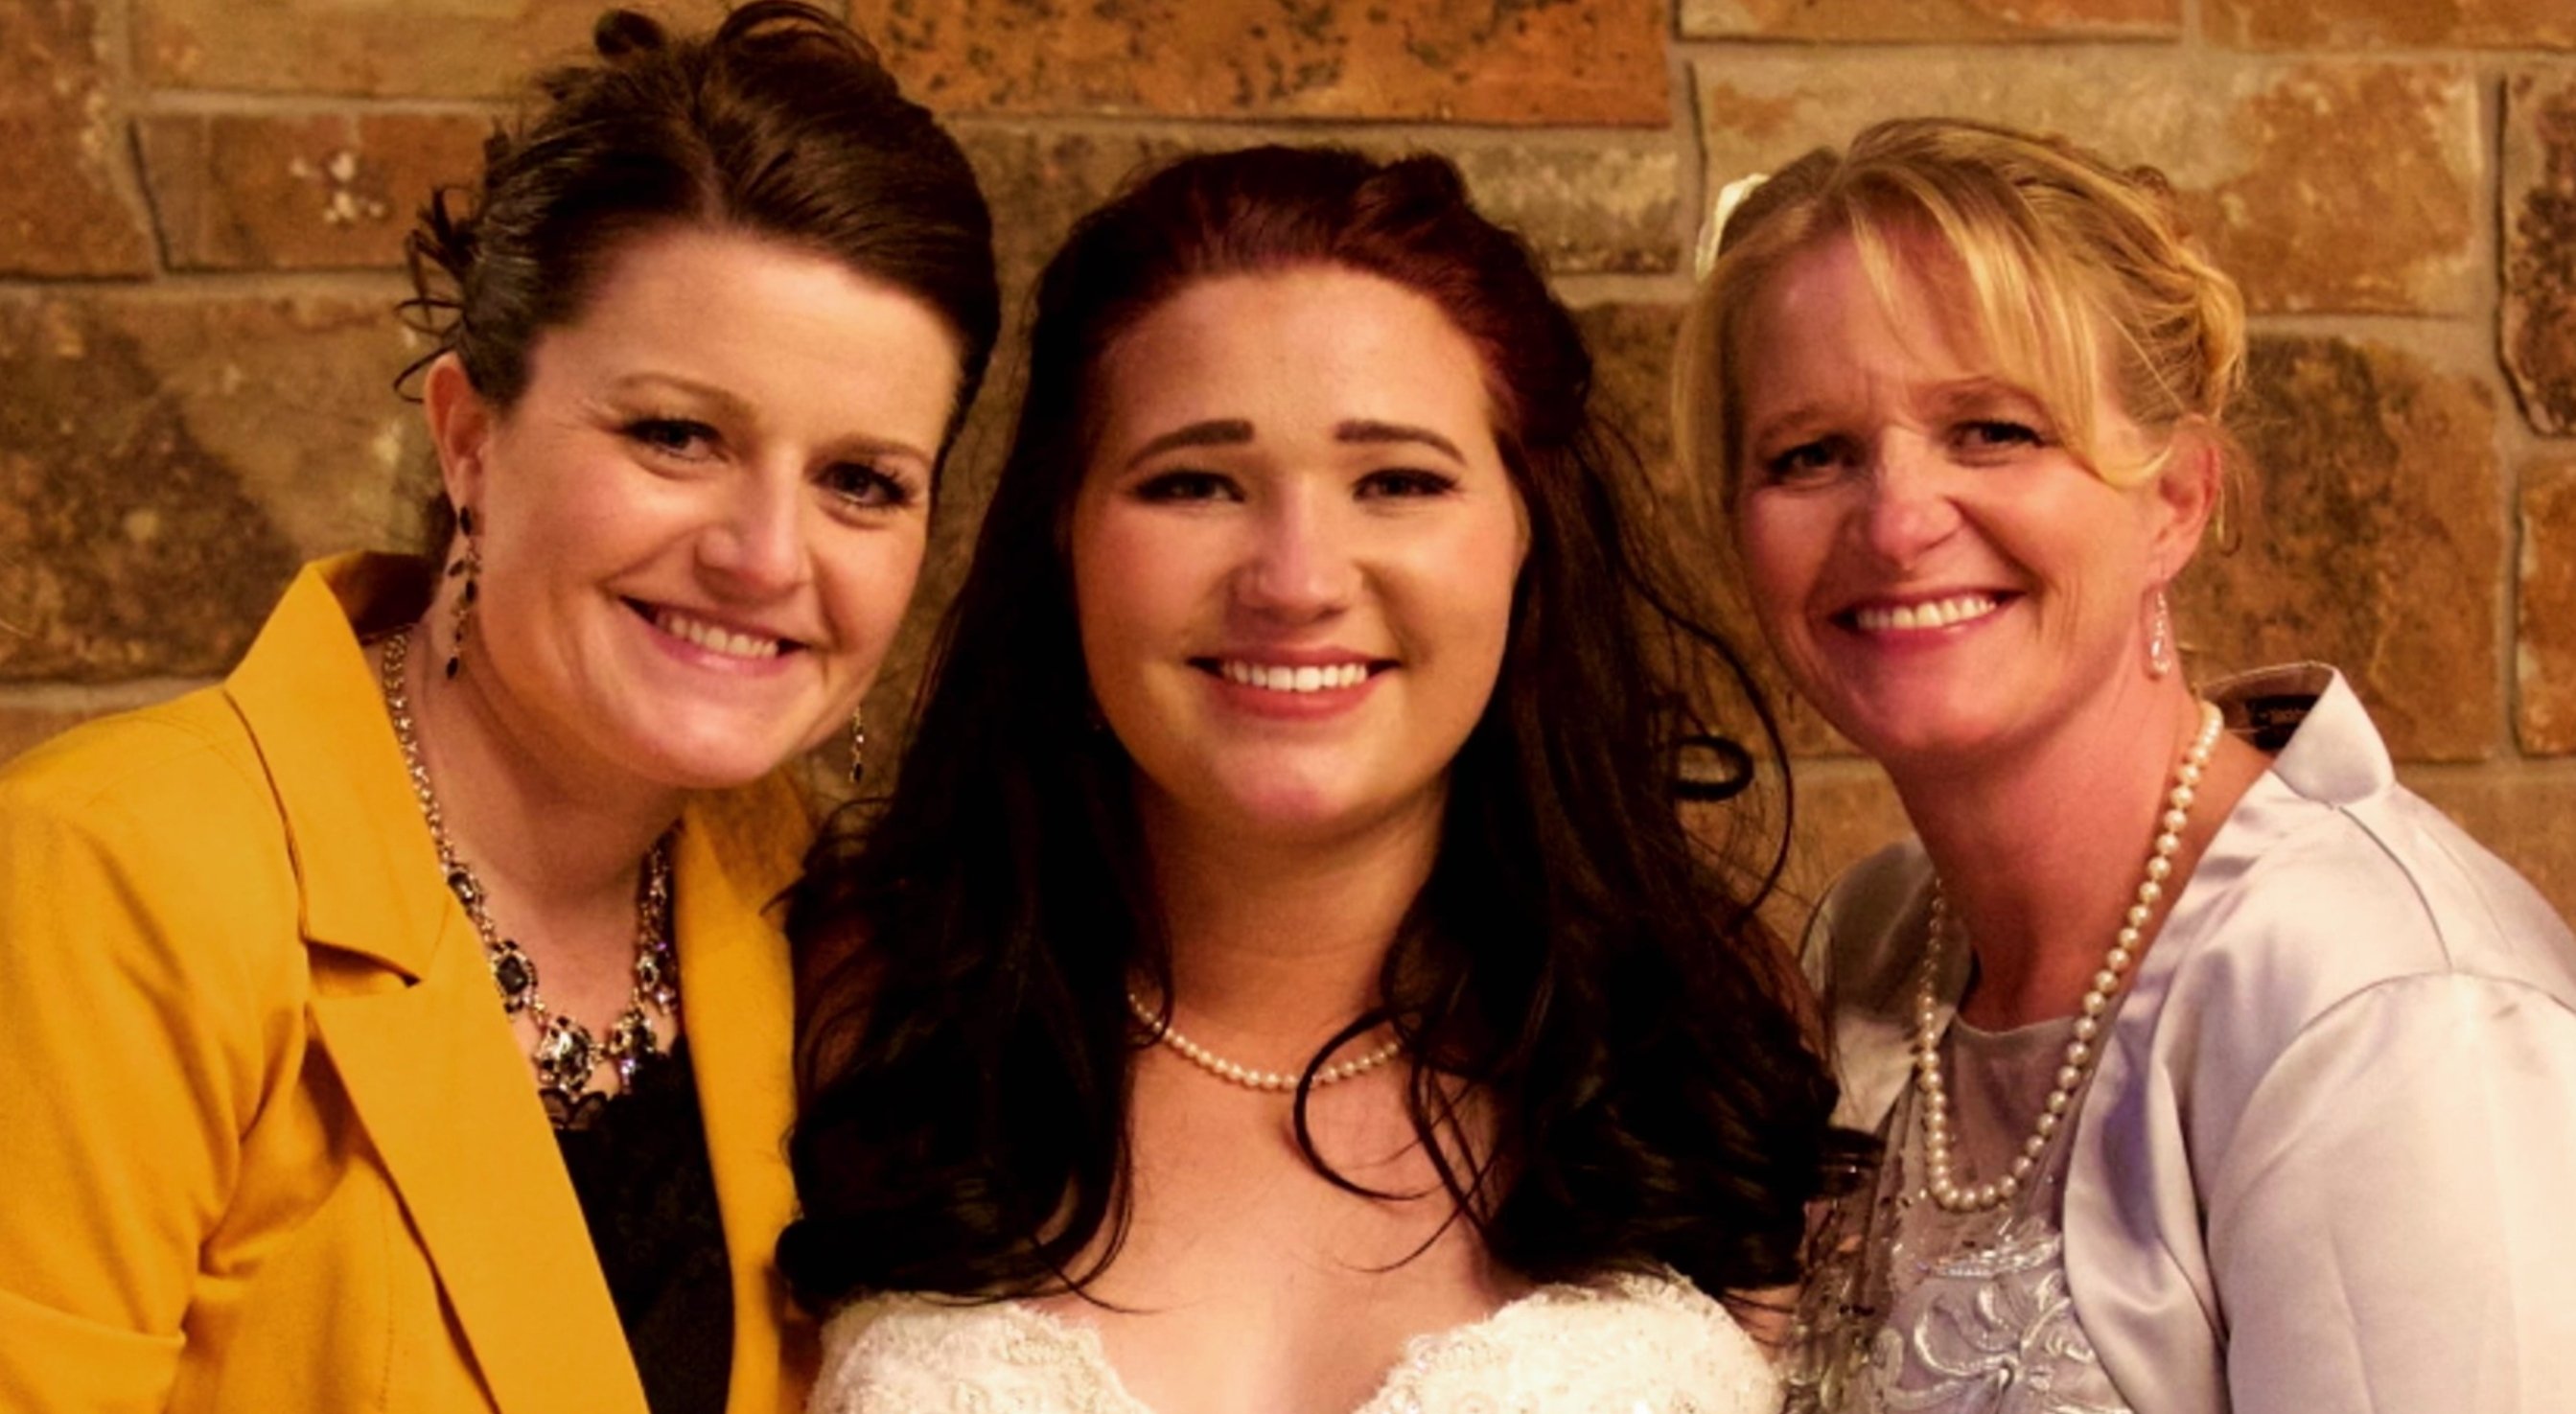 Robyn Brown and Christine Brown pose with Mykelti Brown on their wedding day to Tony Padron in TLC's Sister Wives.